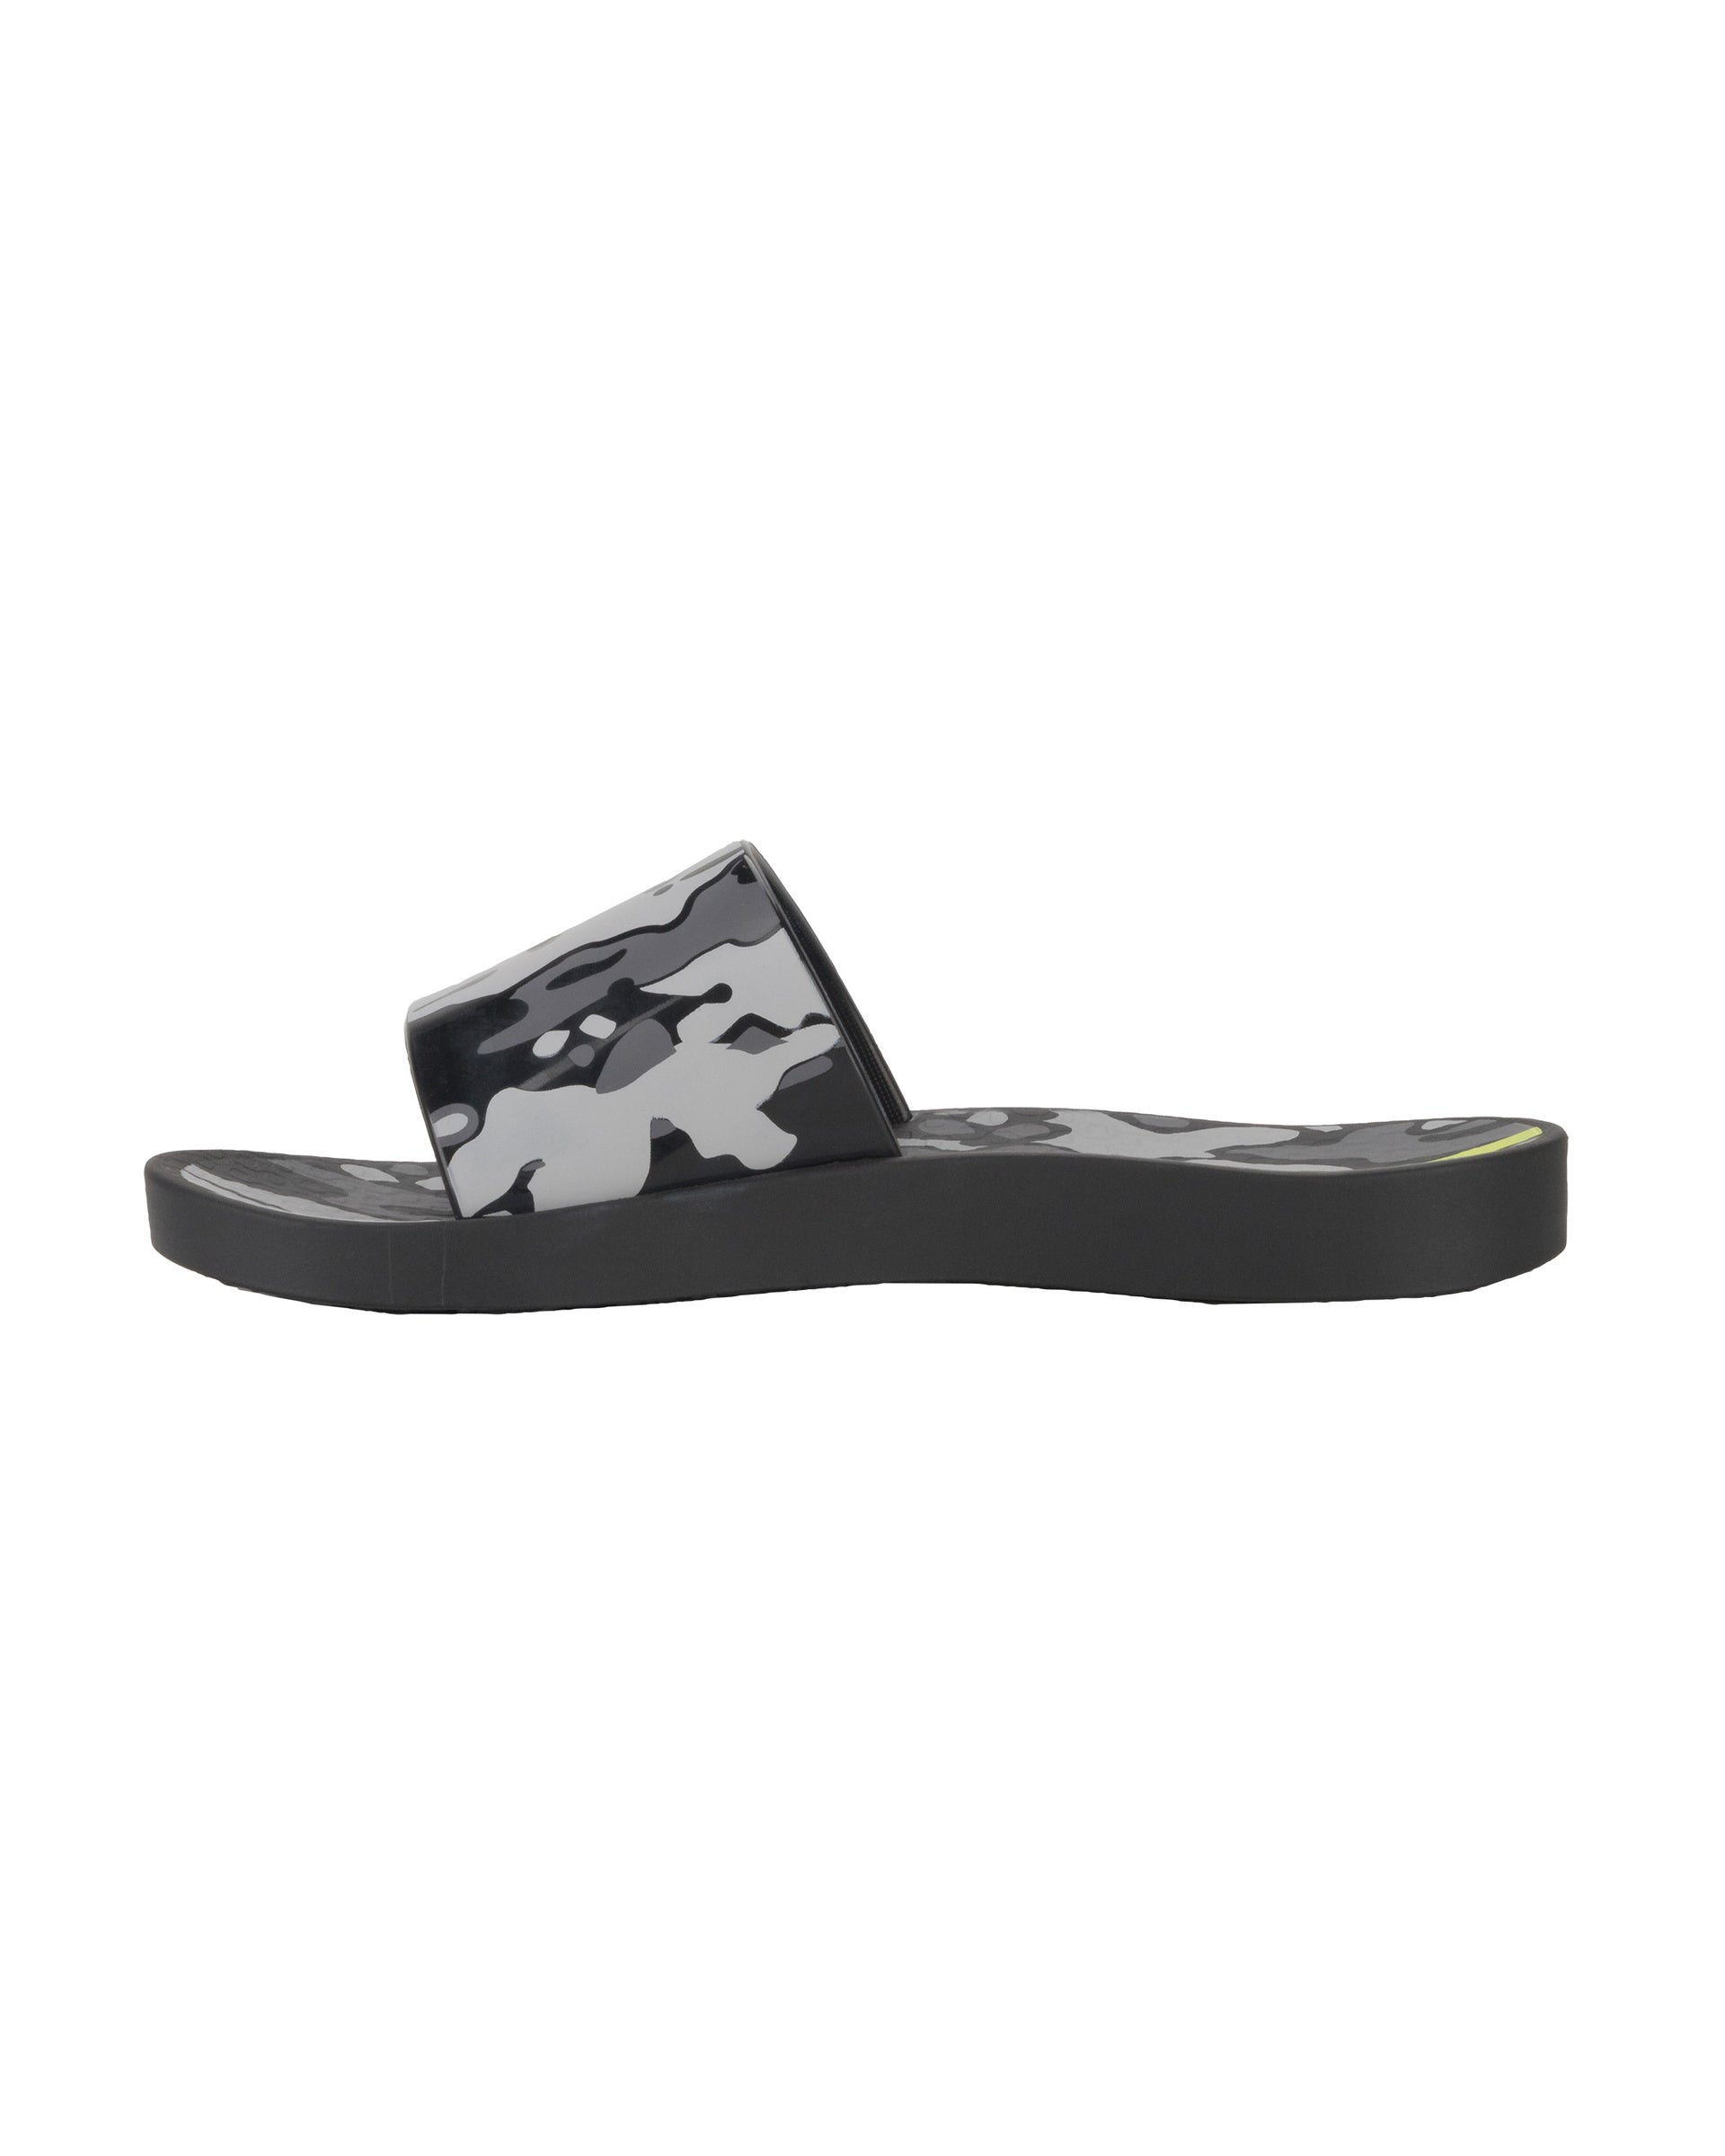 Inner side view of a black Ipanema Urban kids slide with a camo print on the upper.